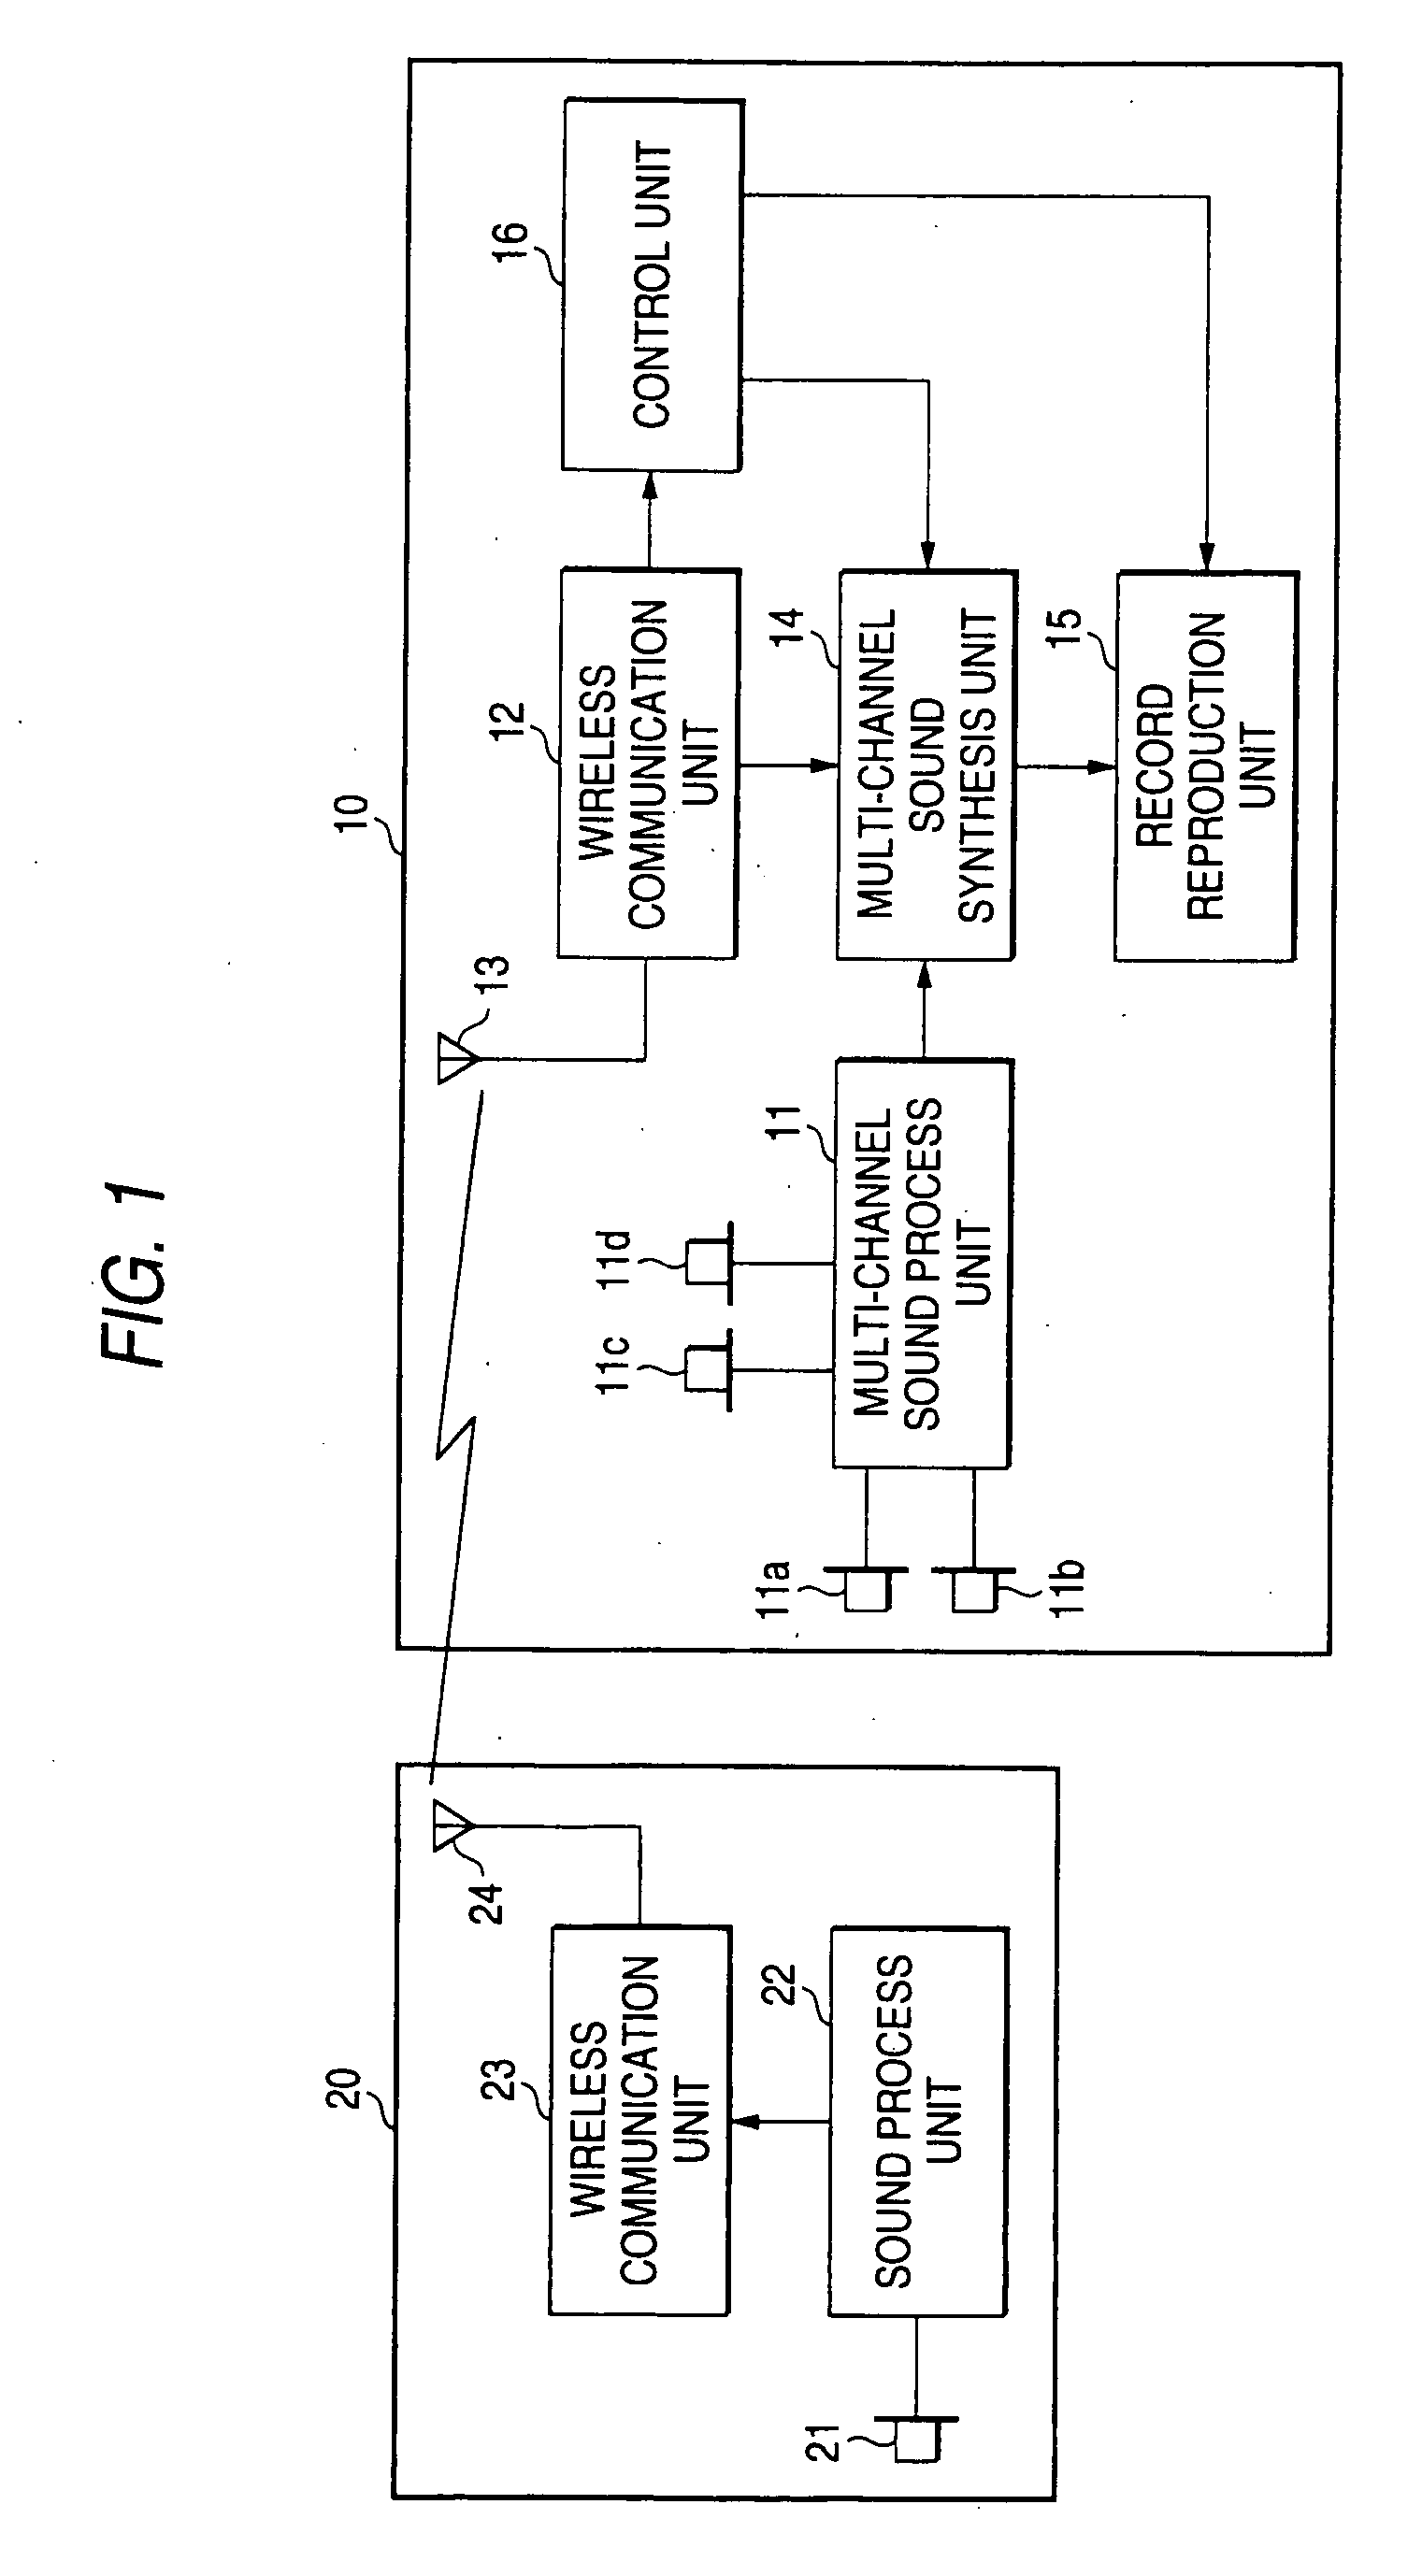 Imaging device, sound record device, and sound record method